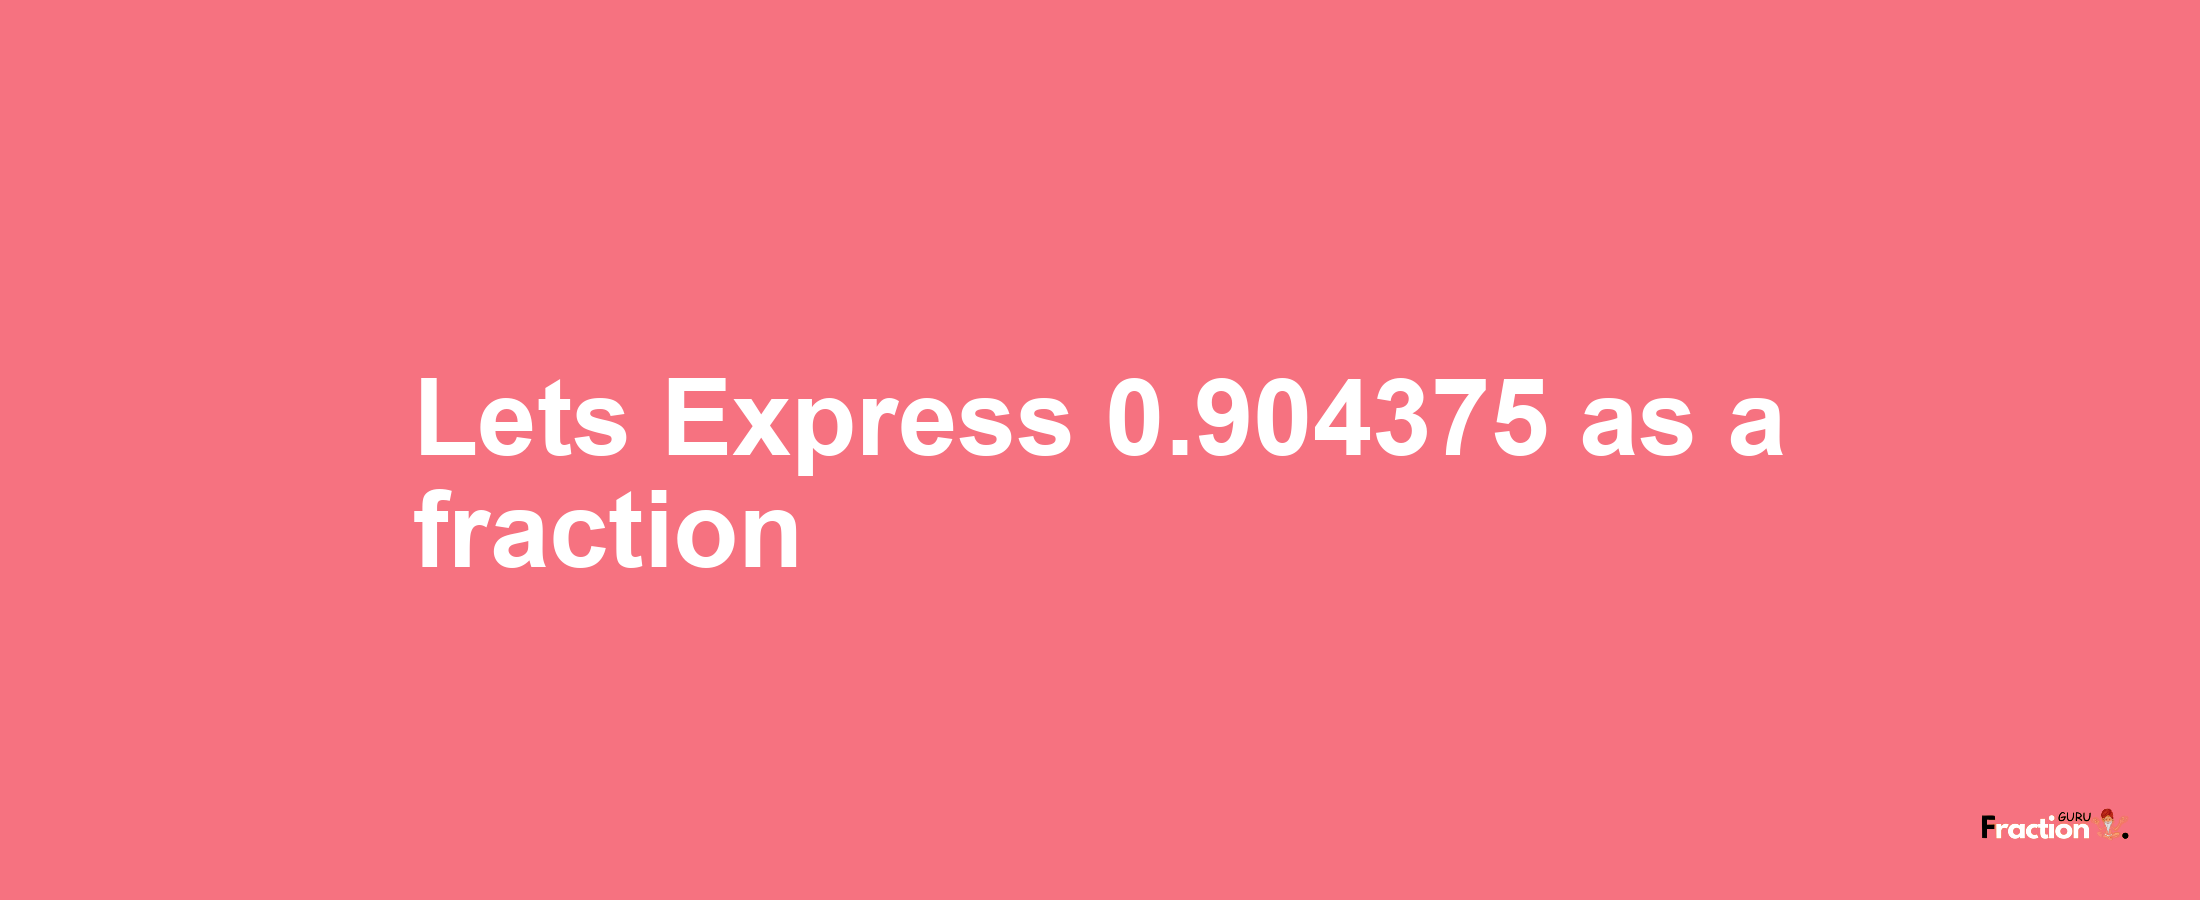 Lets Express 0.904375 as afraction